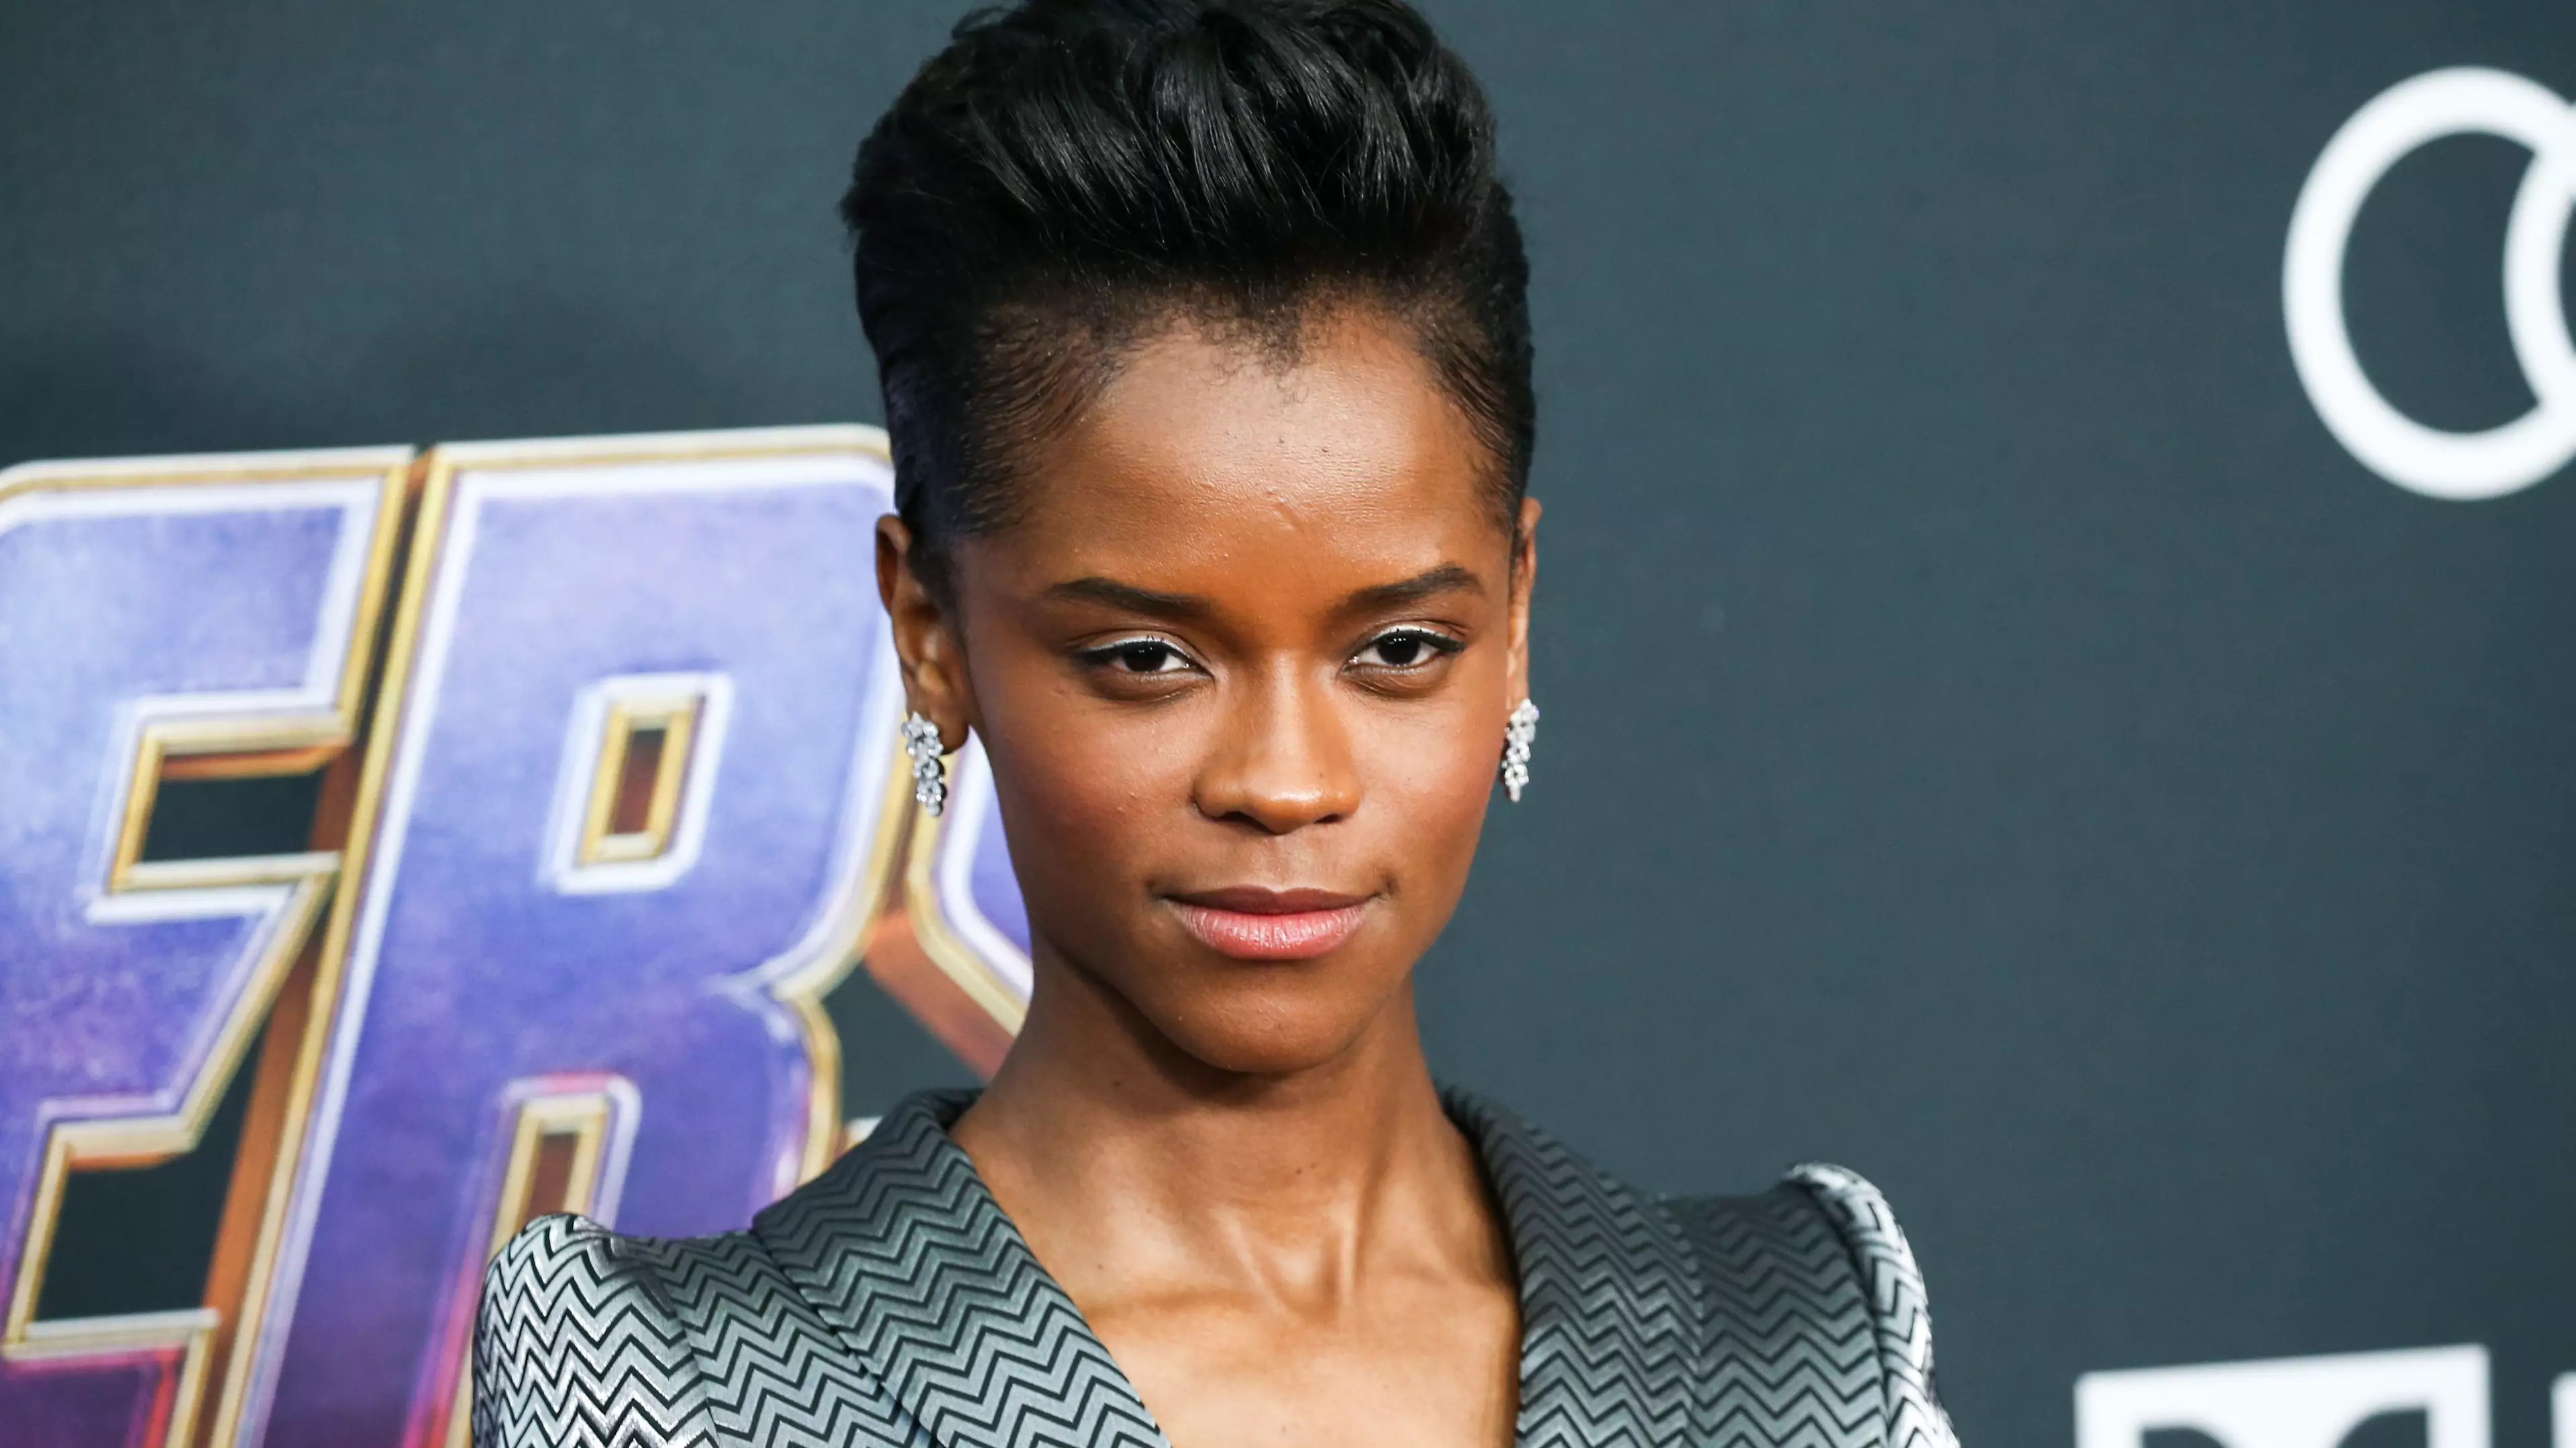 Black Panther Star Letitia Wright Deletes Twitter Account After Posting Anti-Vaxx Opinions